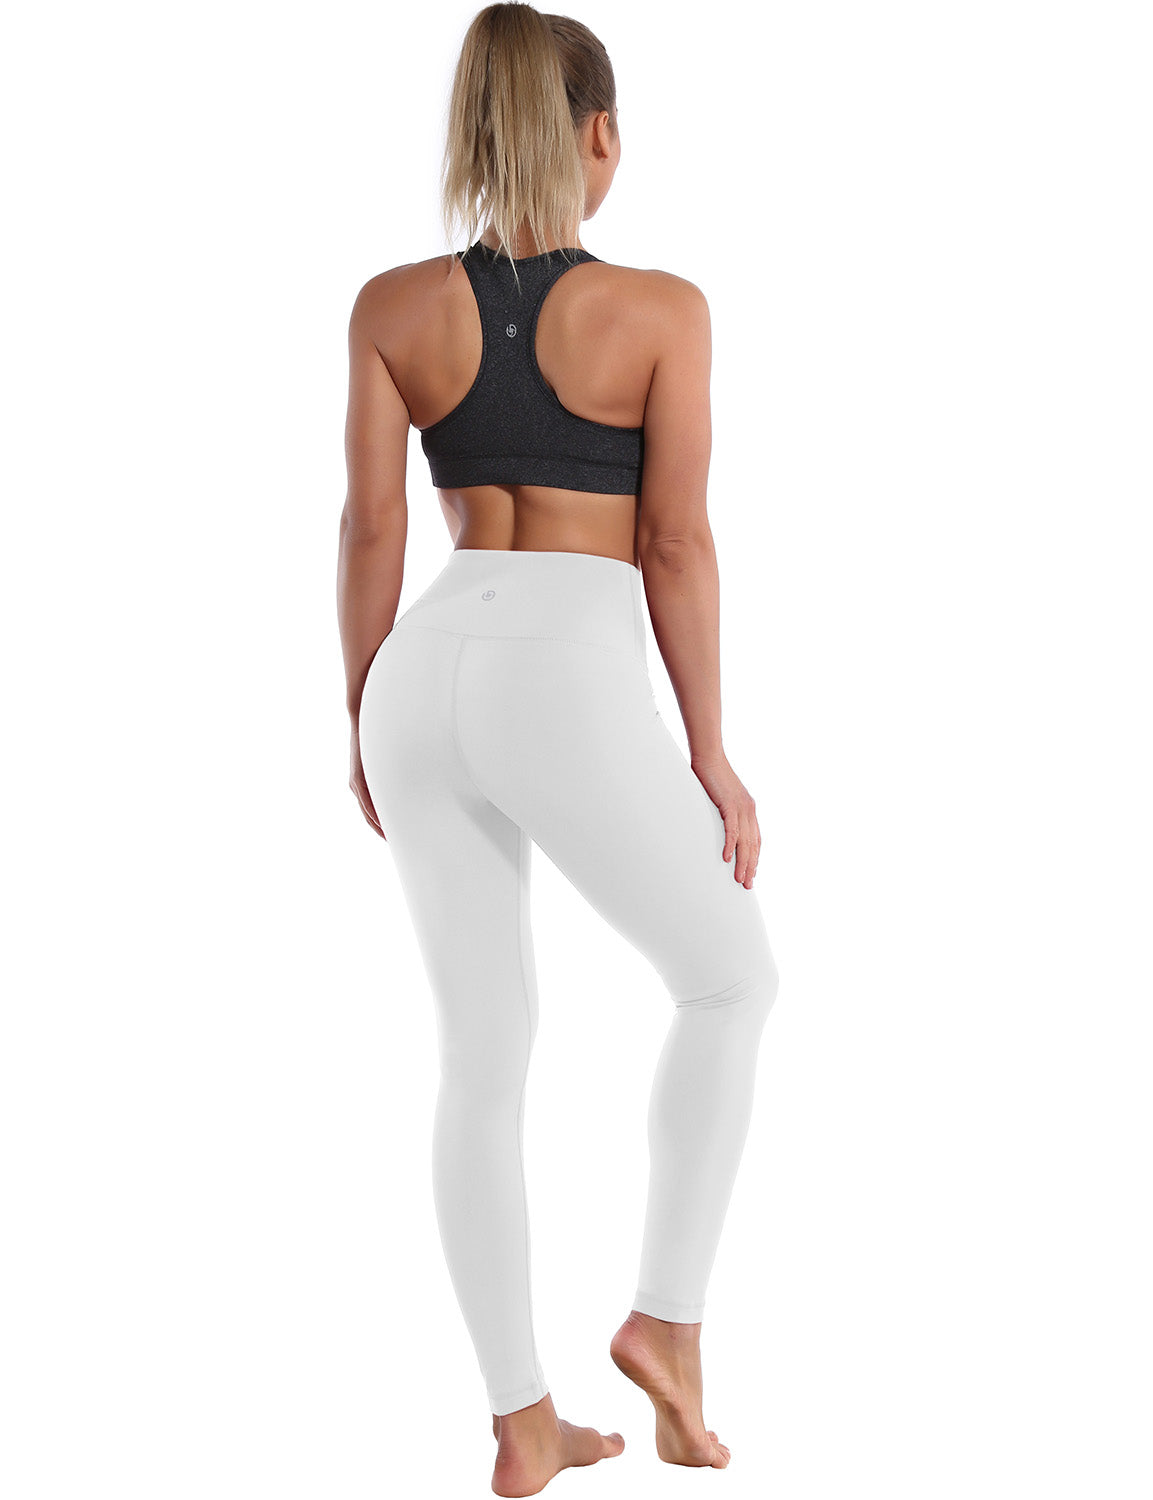 High Waist yogastudio Pants white 75%Nylon/25%Spandex Fabric doesn't attract lint easily 4-way stretch No see-through Moisture-wicking Tummy control Inner pocket Four lengths